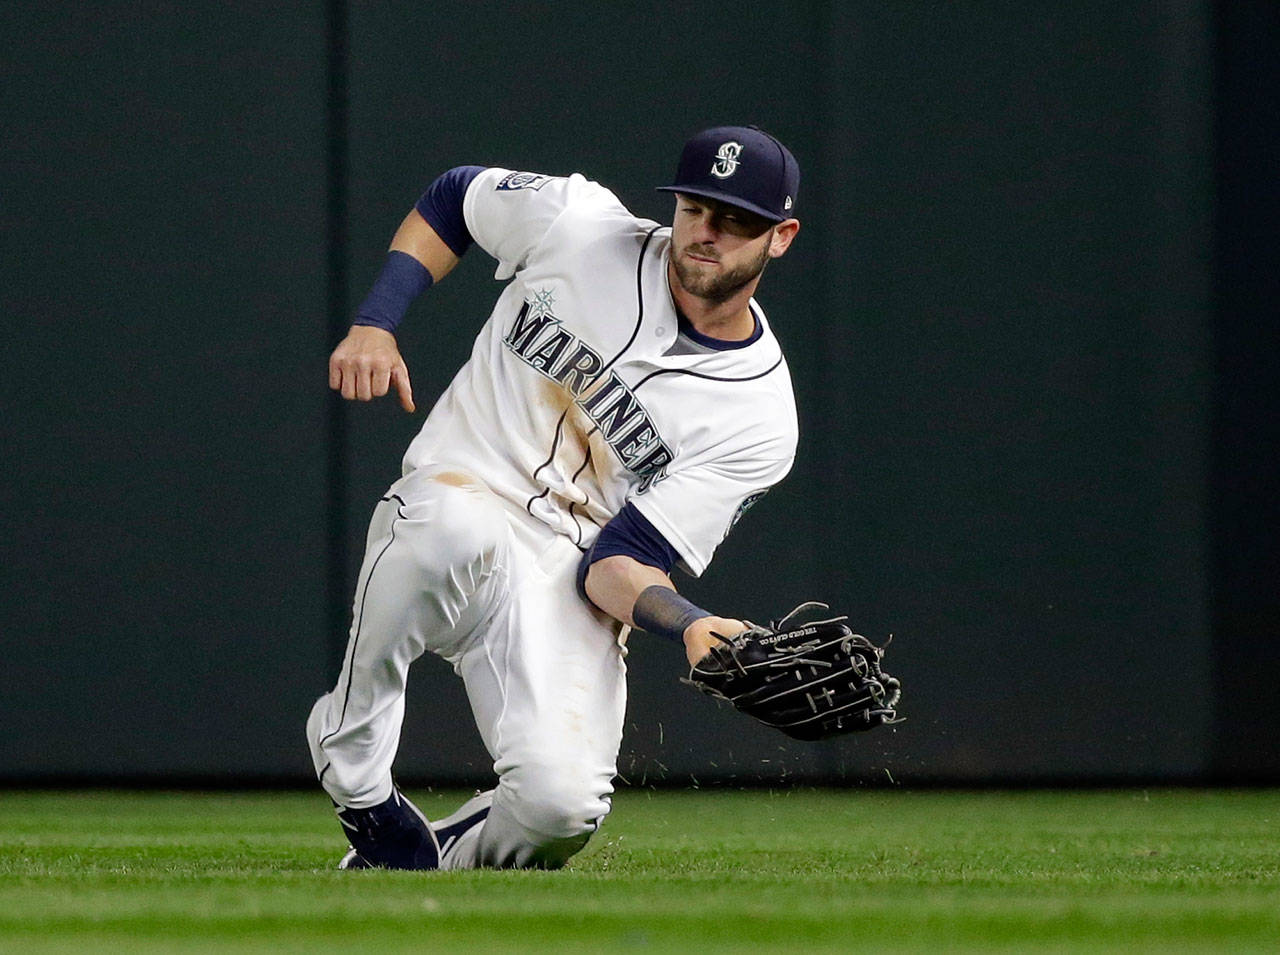 Mariners right fielder Mitch Haniger makes a sliding catch during a game against the Astros on April 12, 2017, in Seattle. (AP Photo/Elaine Thompson)